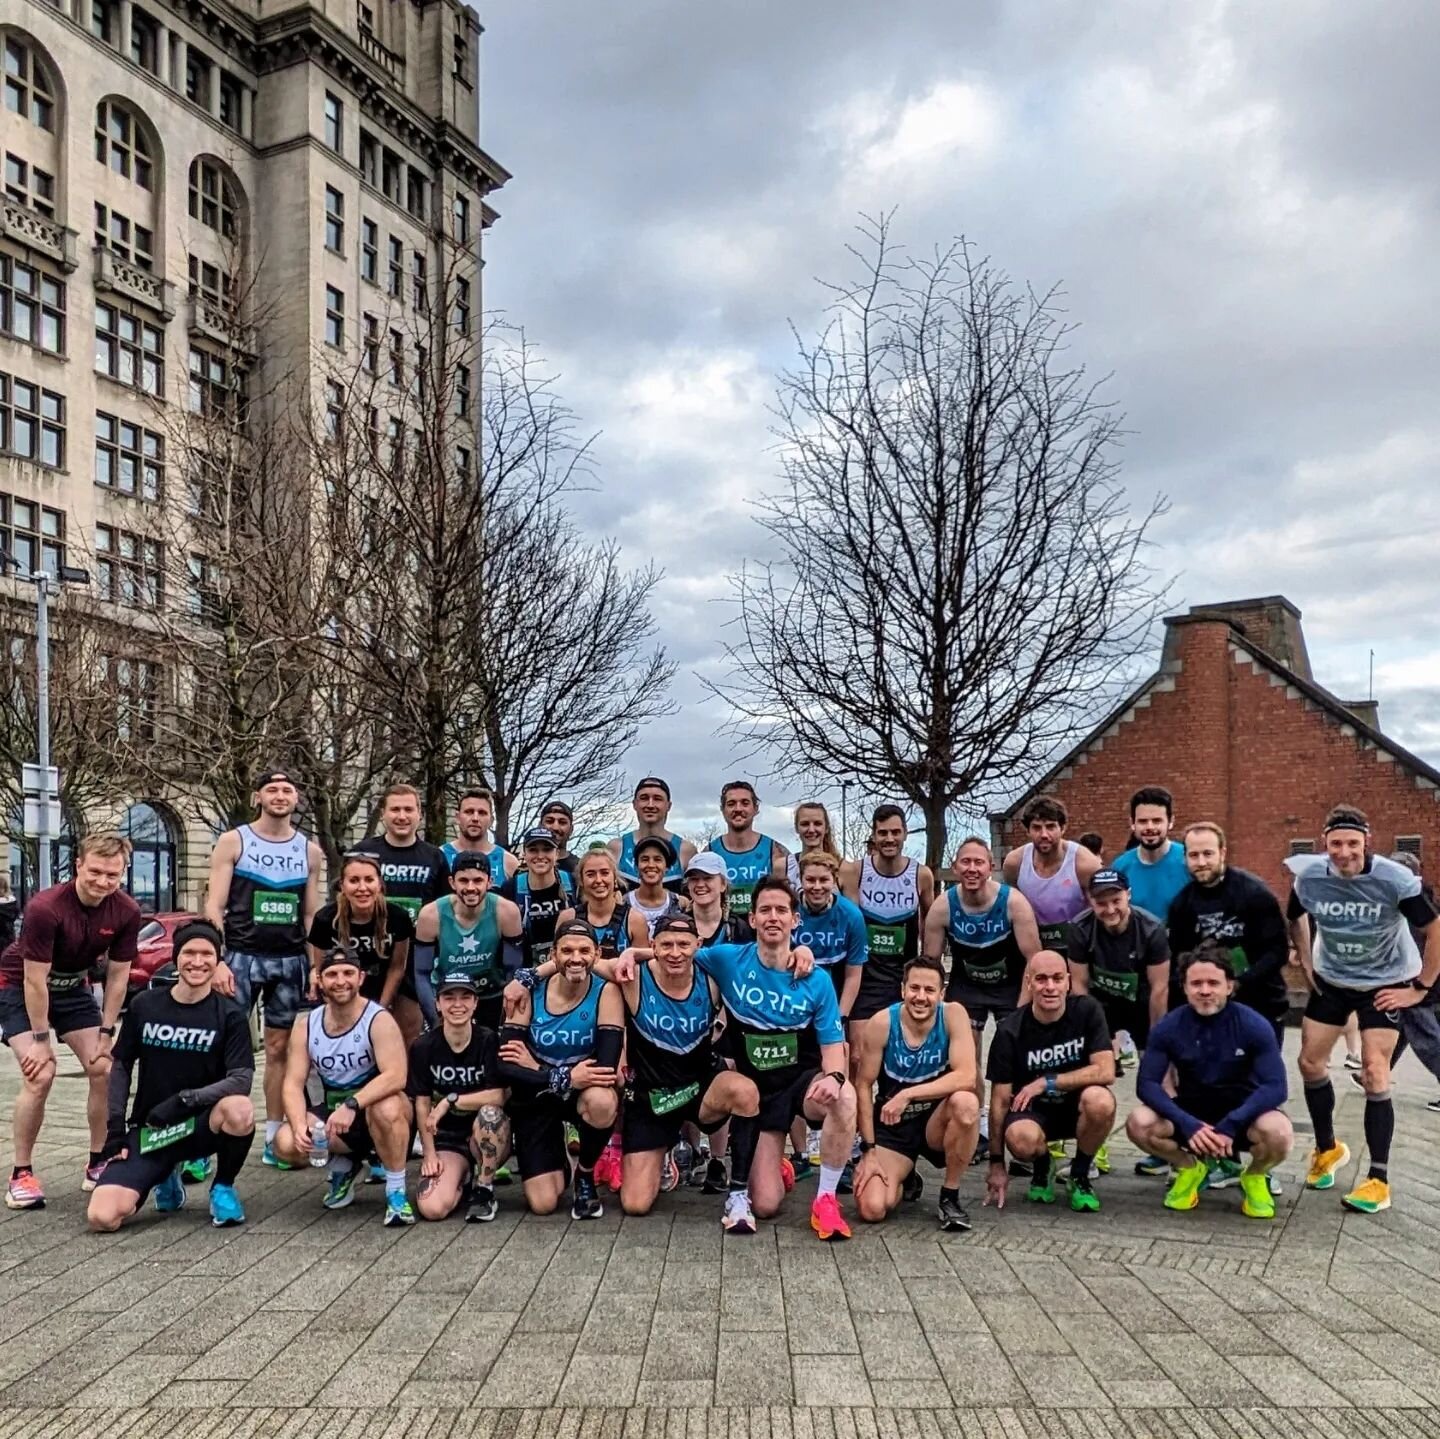 WHAT A WEEKEND!

An unbelievable team turnout @btrliverpool Half Marathon to start our 5th Anniversary celebrations. From the support on course, to the results from our runners and the post-race social, it was a brilliant day! 🏃&zwj;♂️🏃&zwj;♀️🤙🎉
